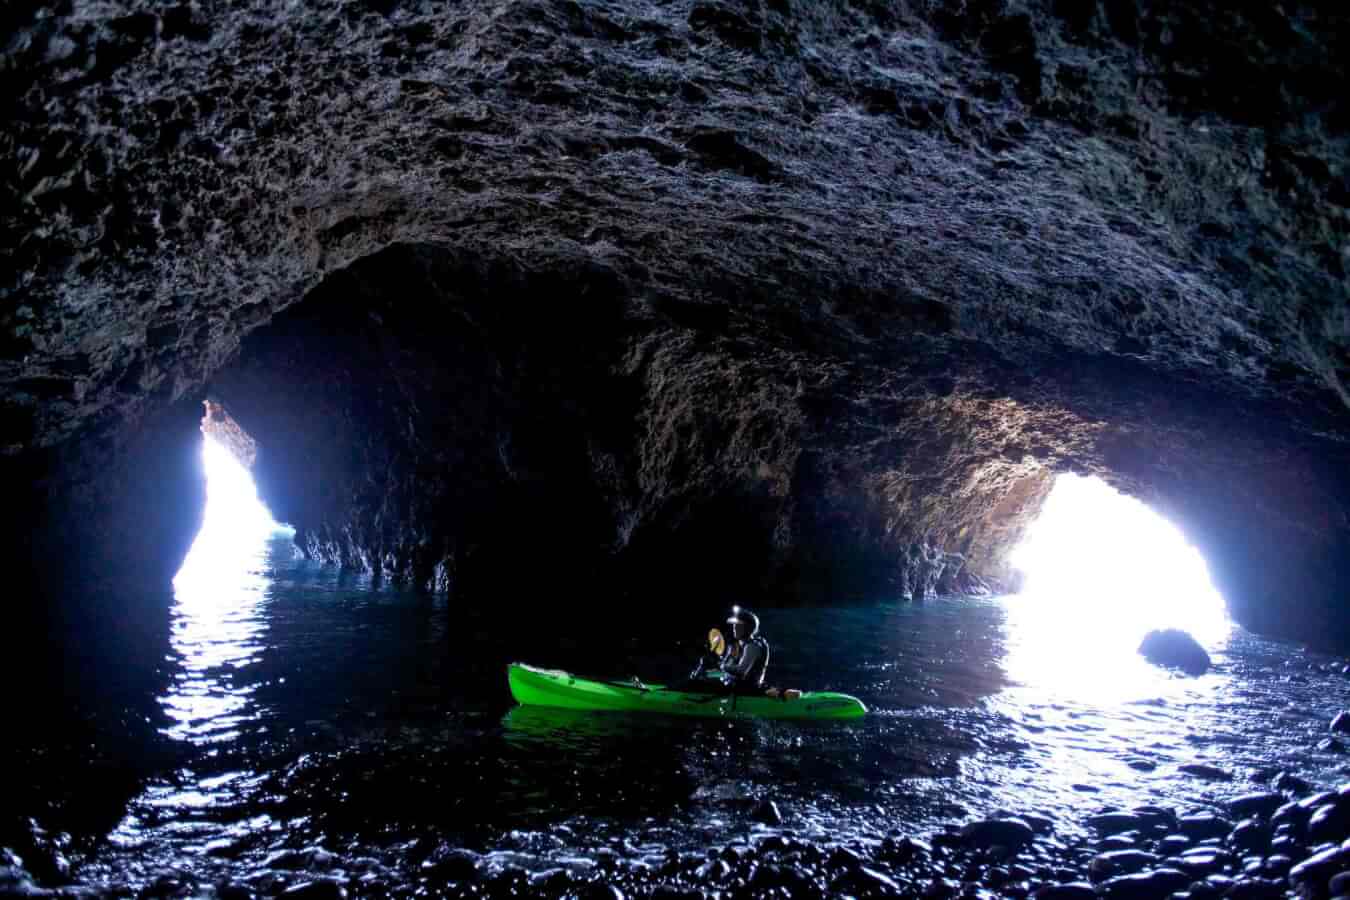 kayaker in the painted caves at the islands